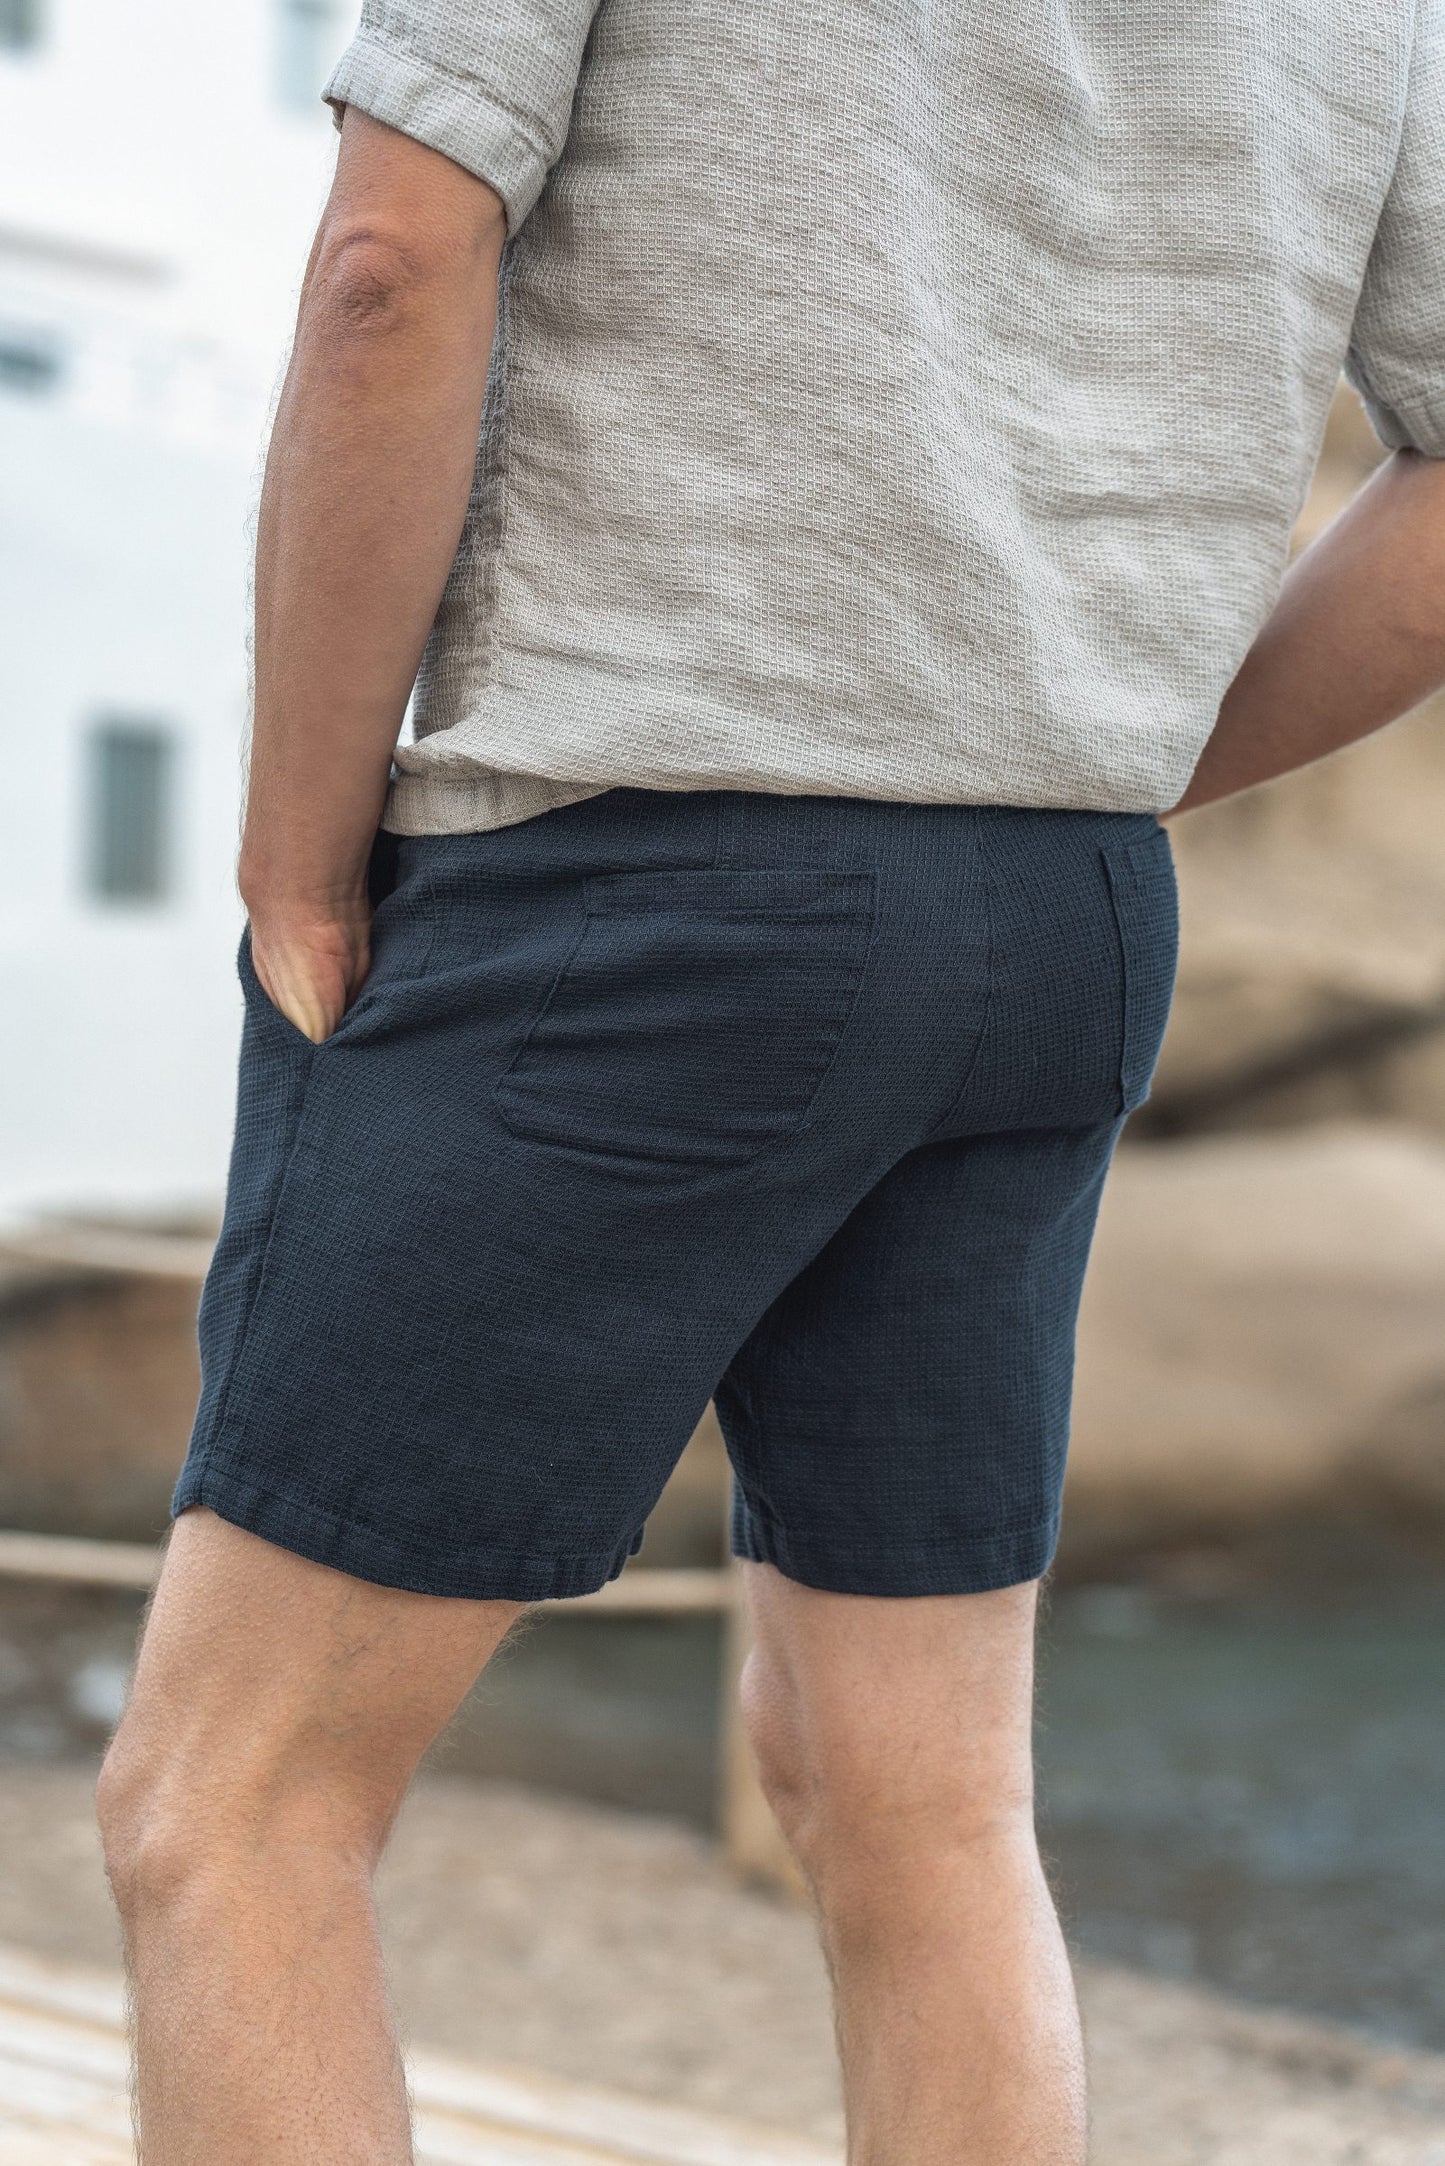 Men's Small Waffle Weave Linen Shorts for Warm-Weather Comfort